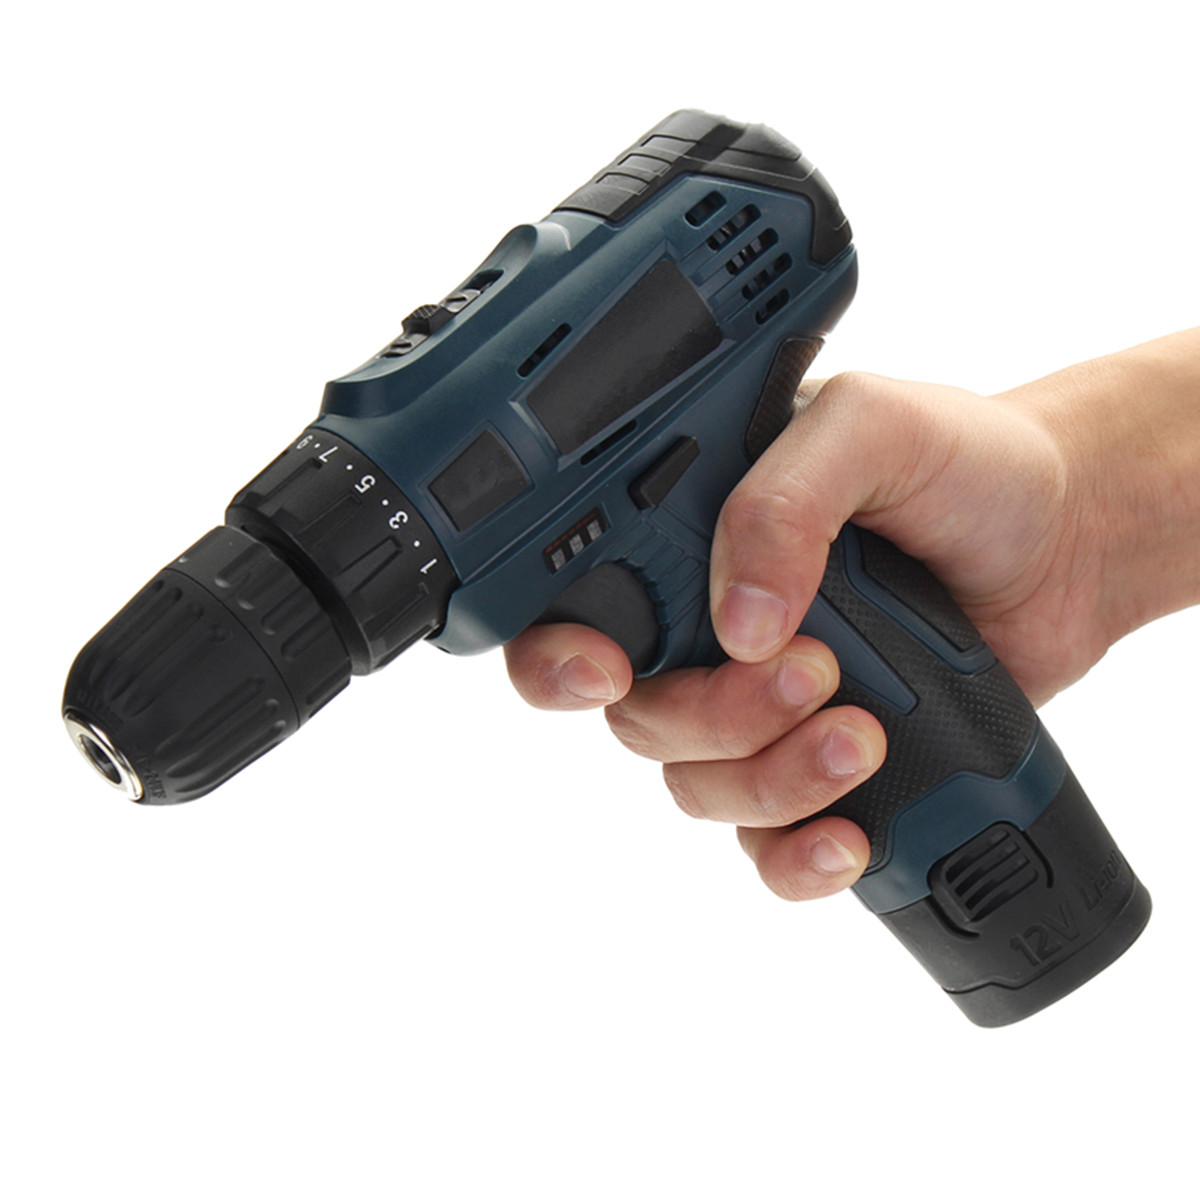 12V-Li-Ion-Cordless-Electric-Screwdriver-Power-Drill-Driver-Hand-Accessories-Kit-2-Speed-LED-Light-1284861-5